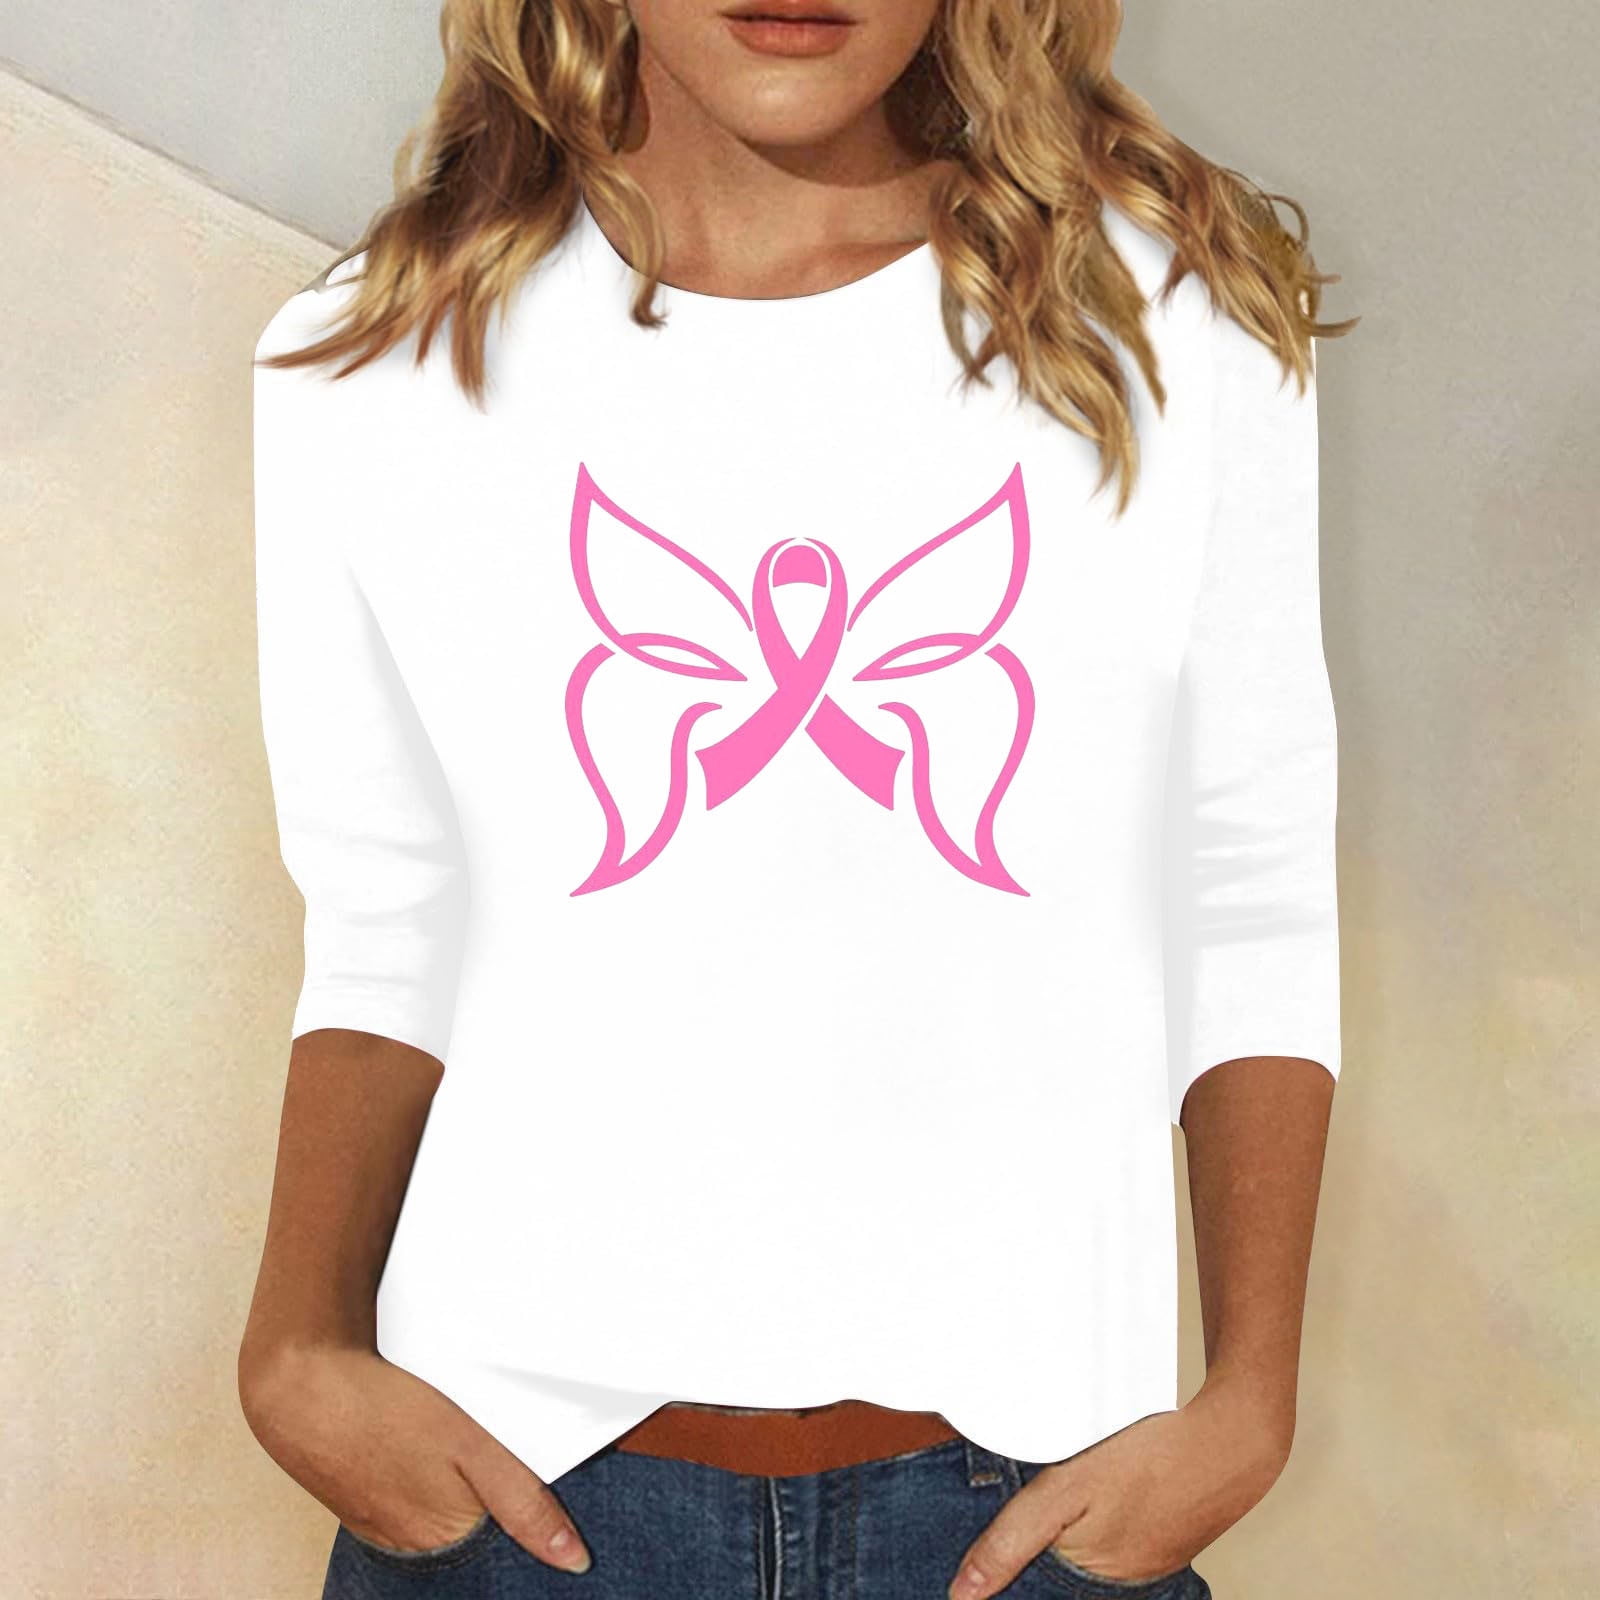 Brnmxoke Breast Cancer Survivor T Shirts for Women 2023 Fall Breast Cancer  Awareness Pink Long Sleeve Shirt - Womens Pink Ribbon Sweatshirts Pullover